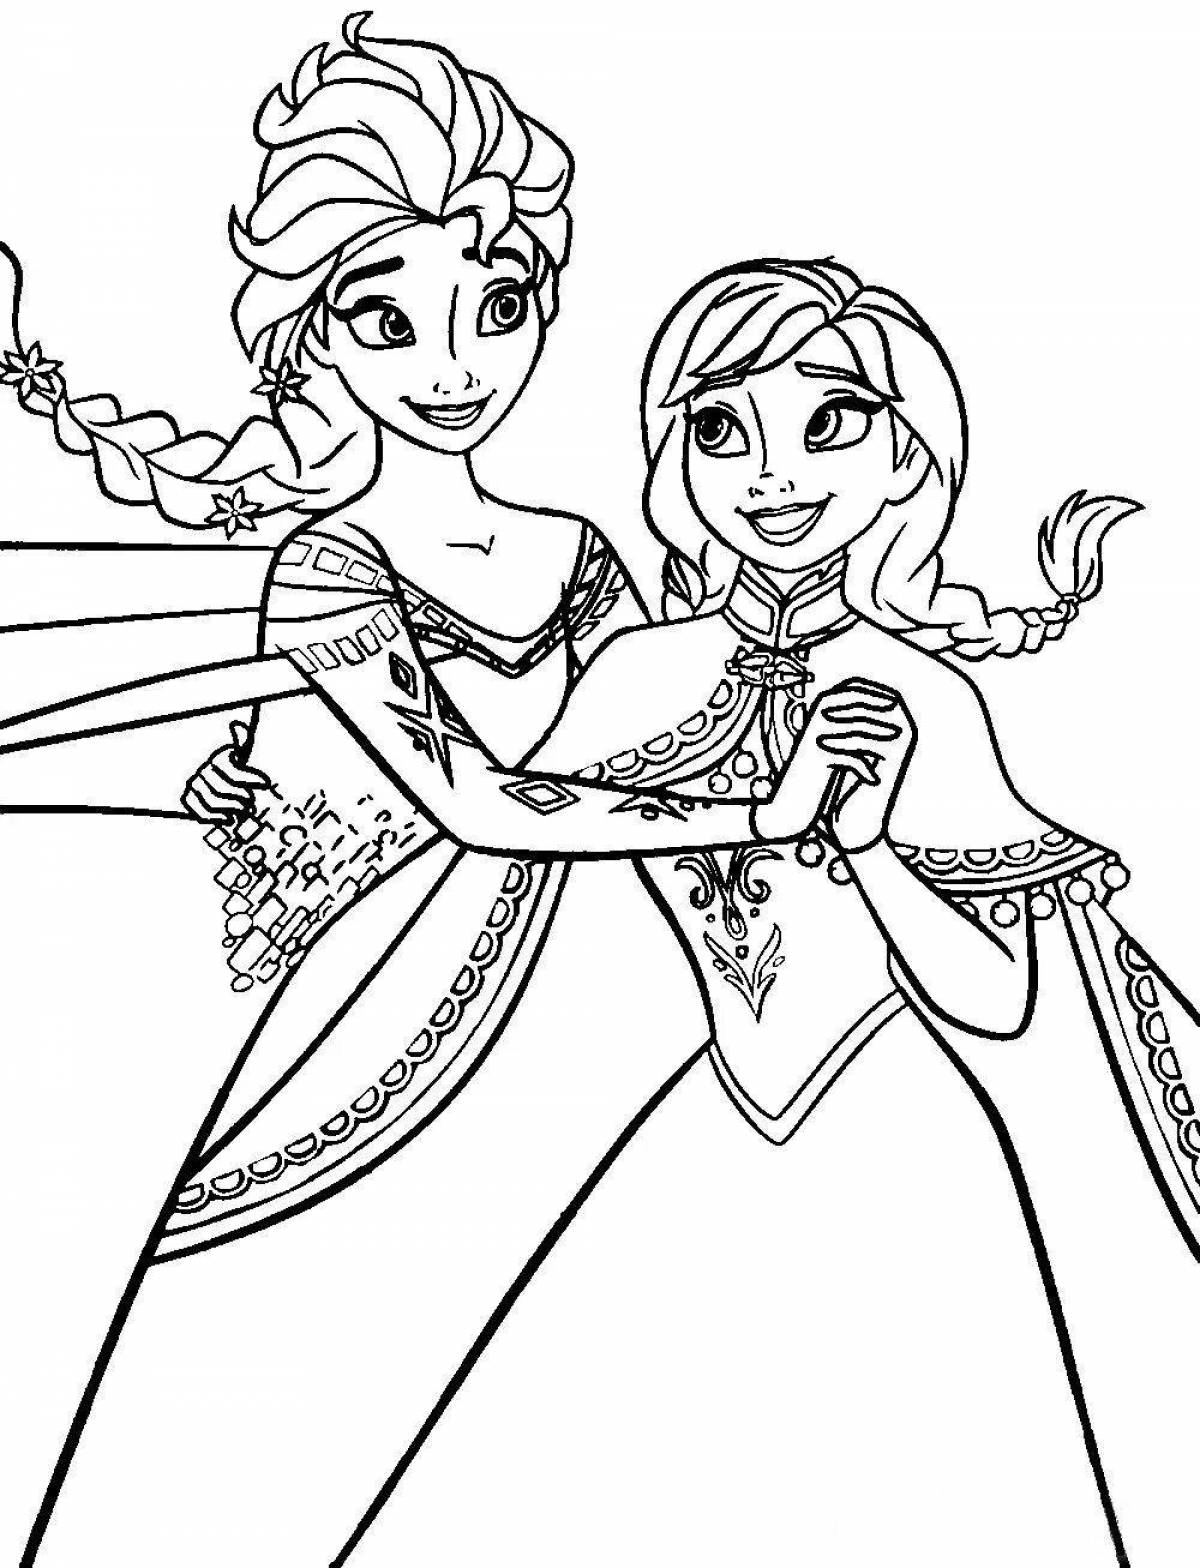 Elsa's dazzling coloring book for 4-5 year olds